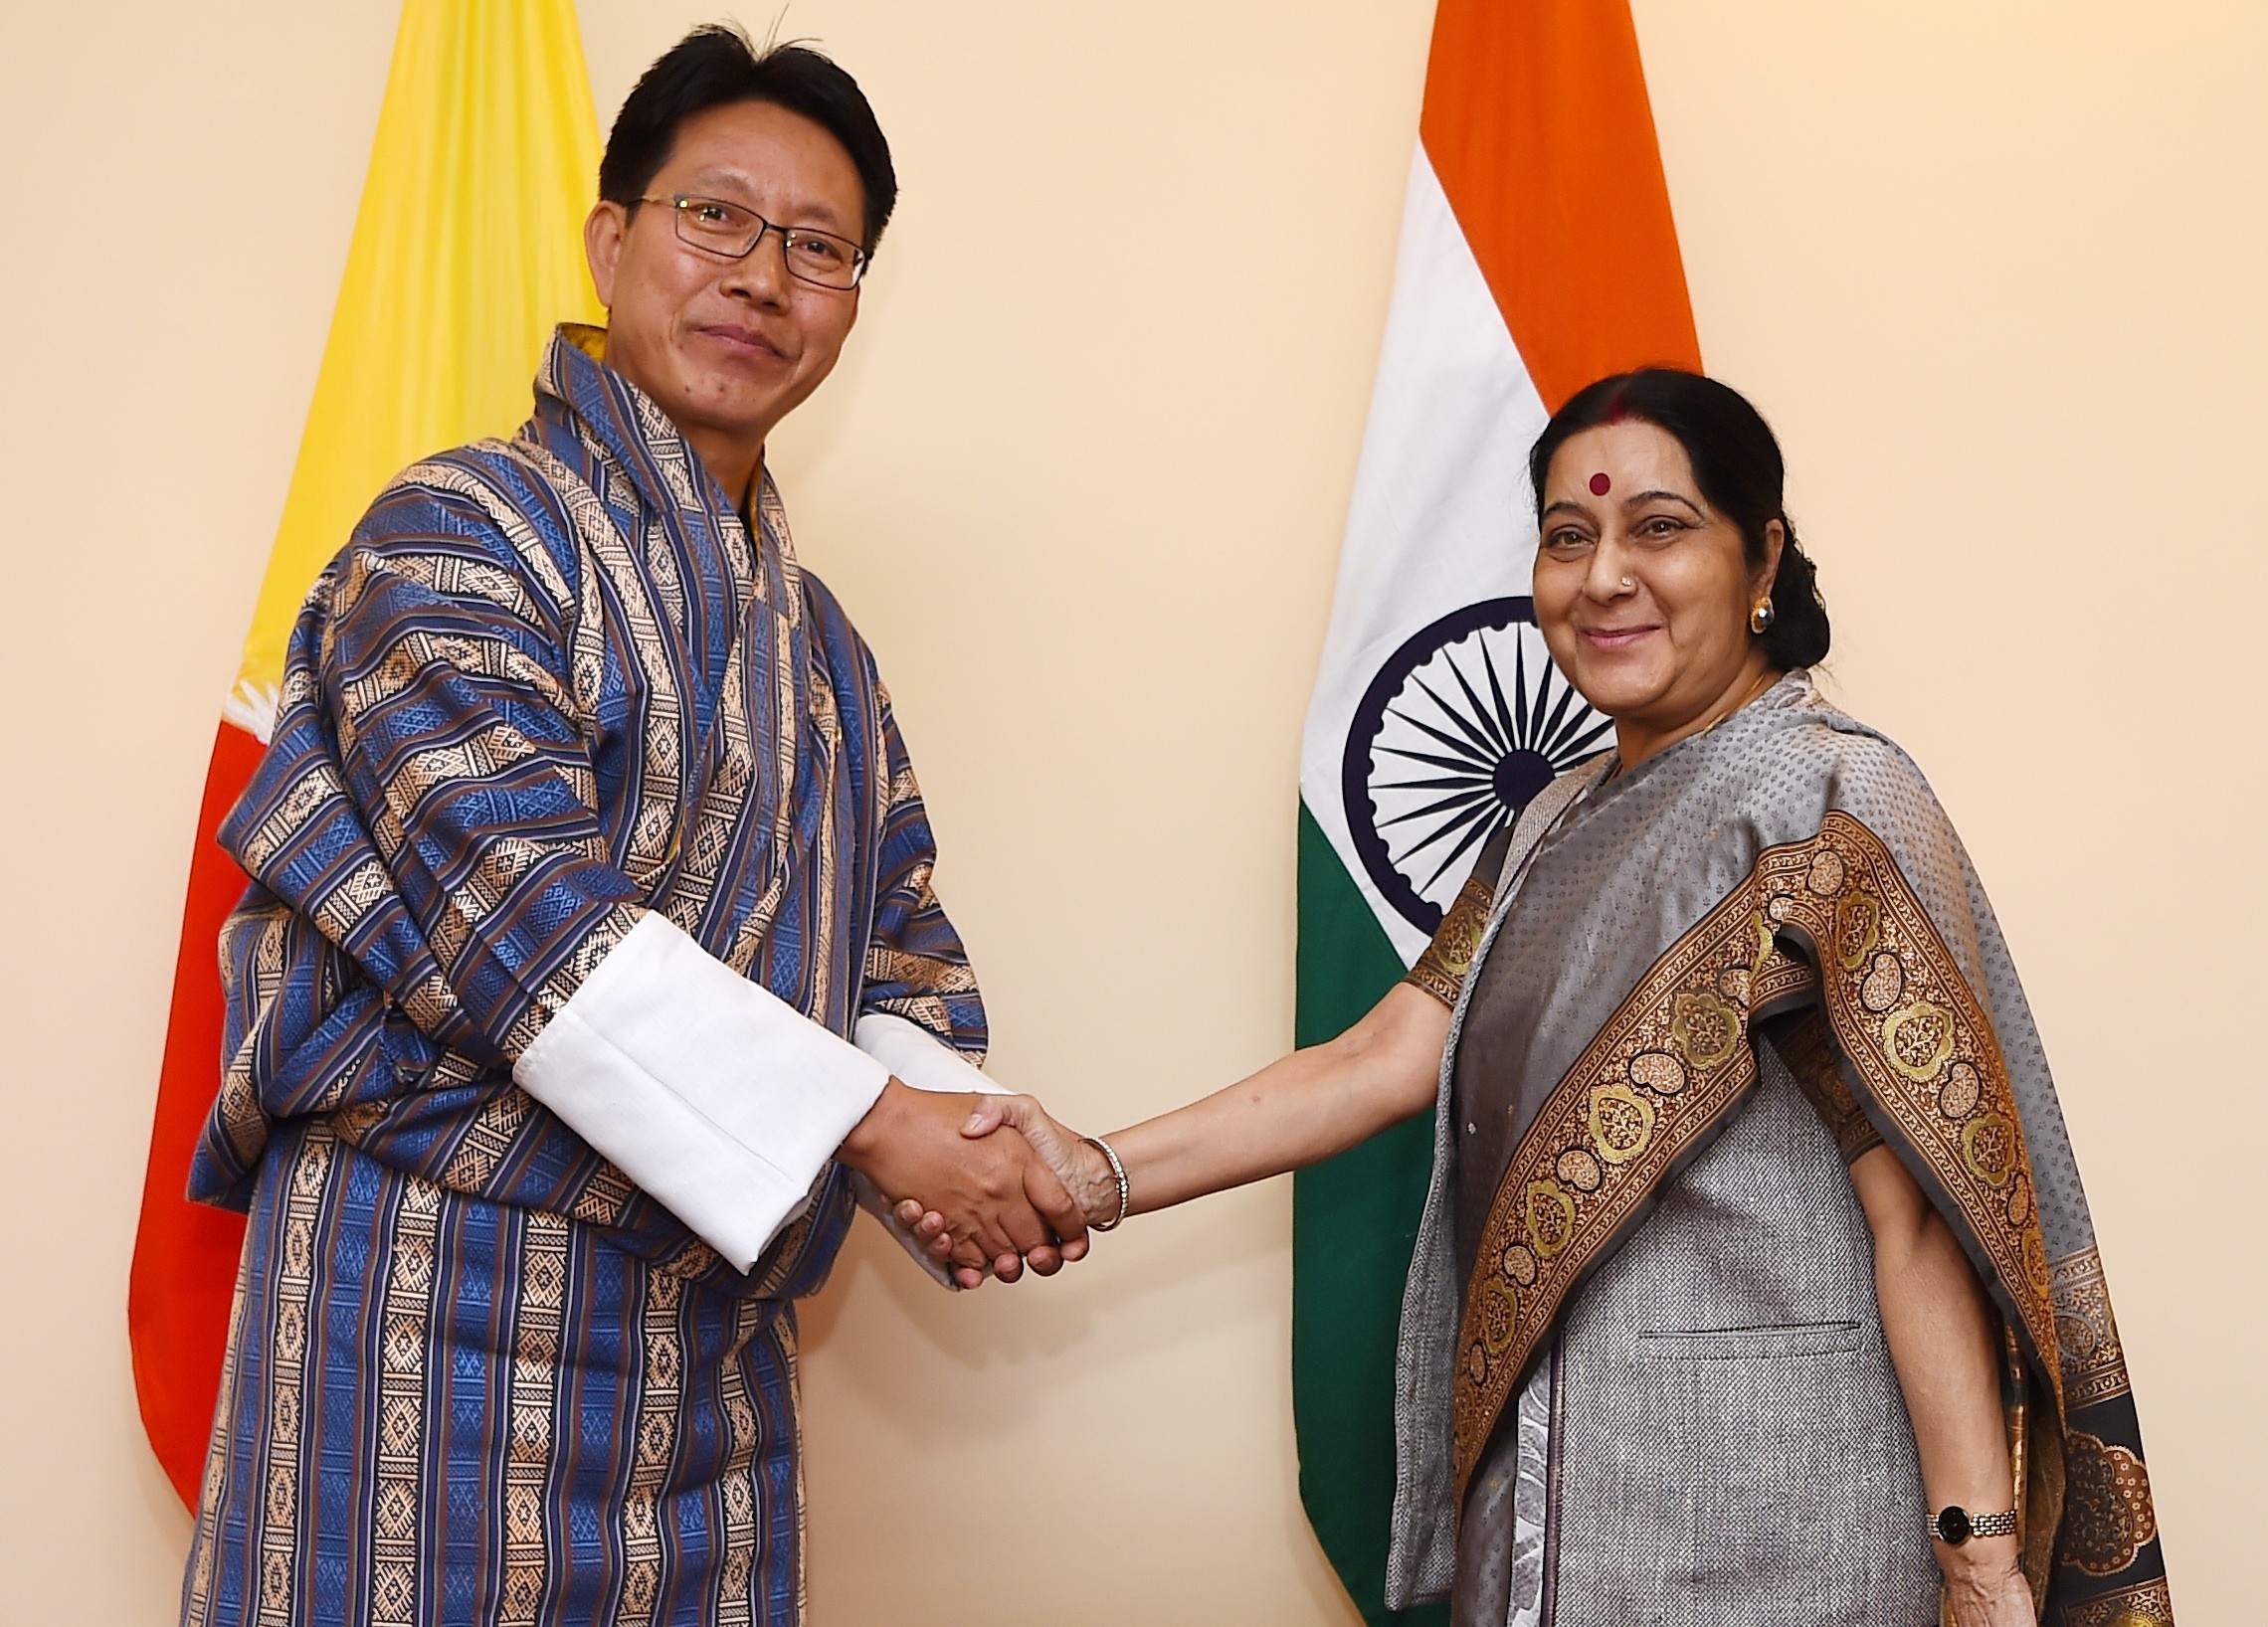 Bhutanese foreign minister Damcho Dorji and Indian foreign minister Sushma Swaraj (right) held a bilateral meeting on August 11 in Kathmandu, Nepal. Both India and China are important to Bhutan, but neither is an overlord of Bhutan. Photo: AFP